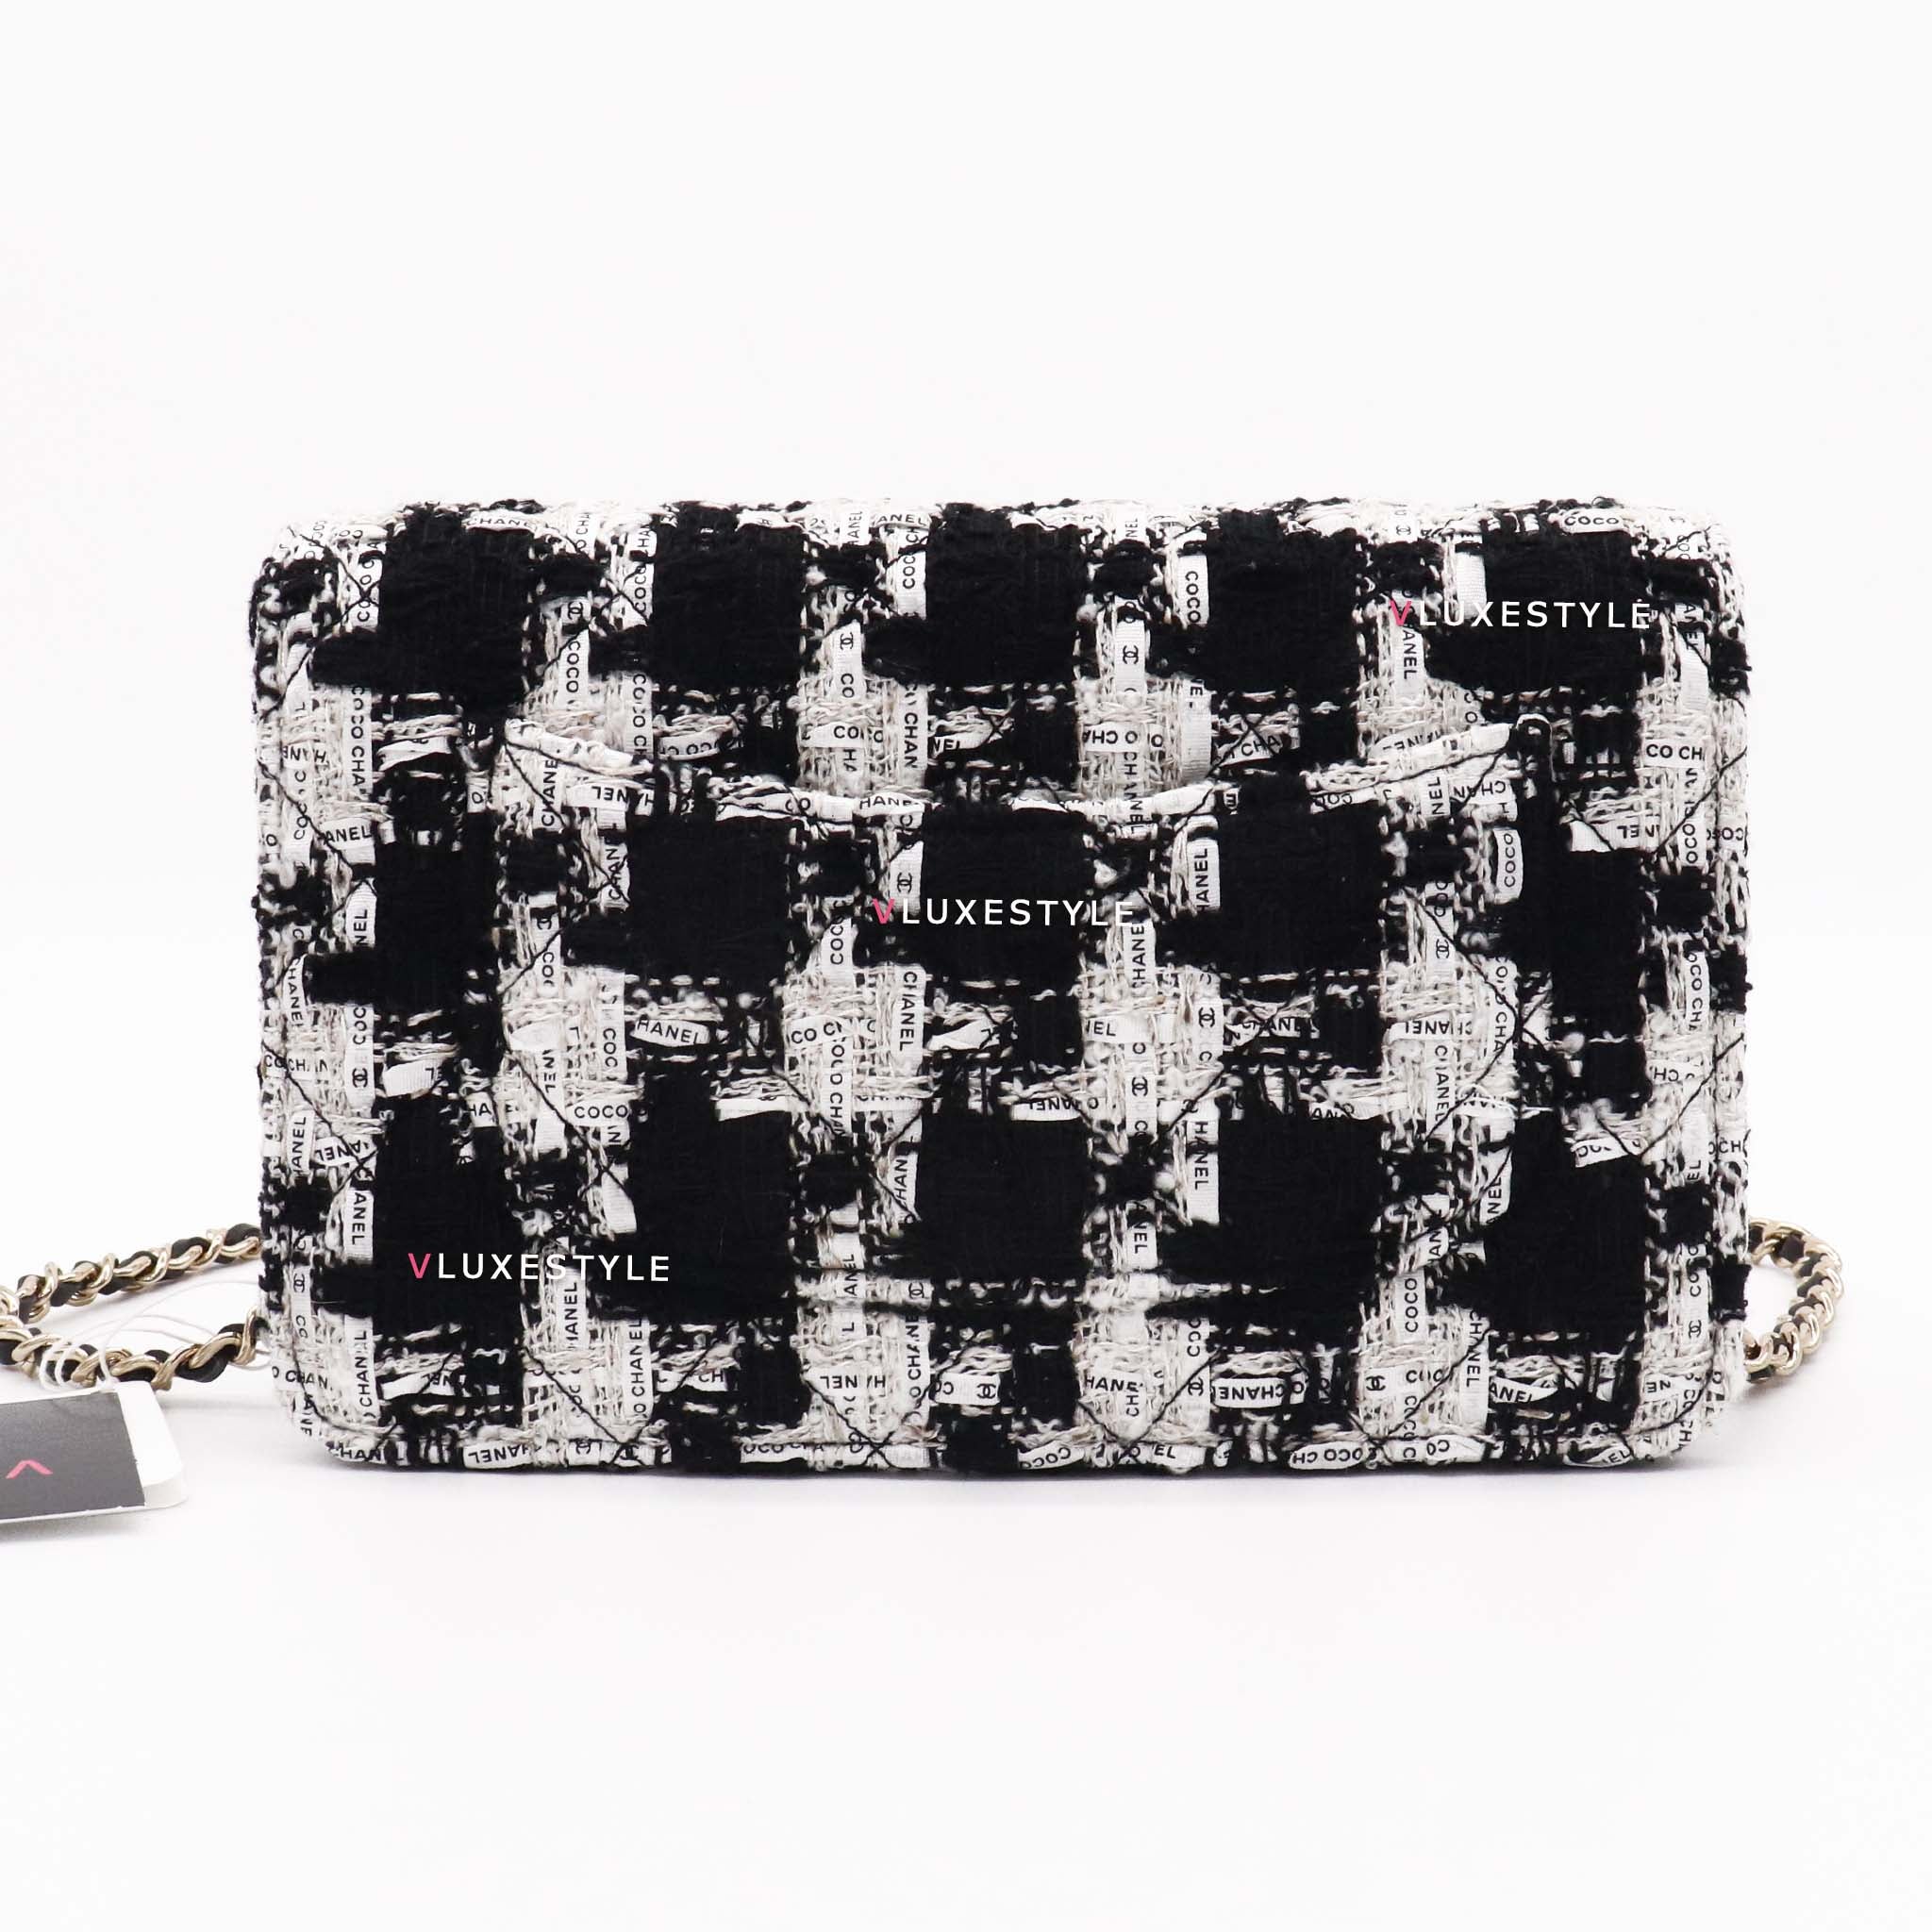 The Chanel Wallet on Chain –